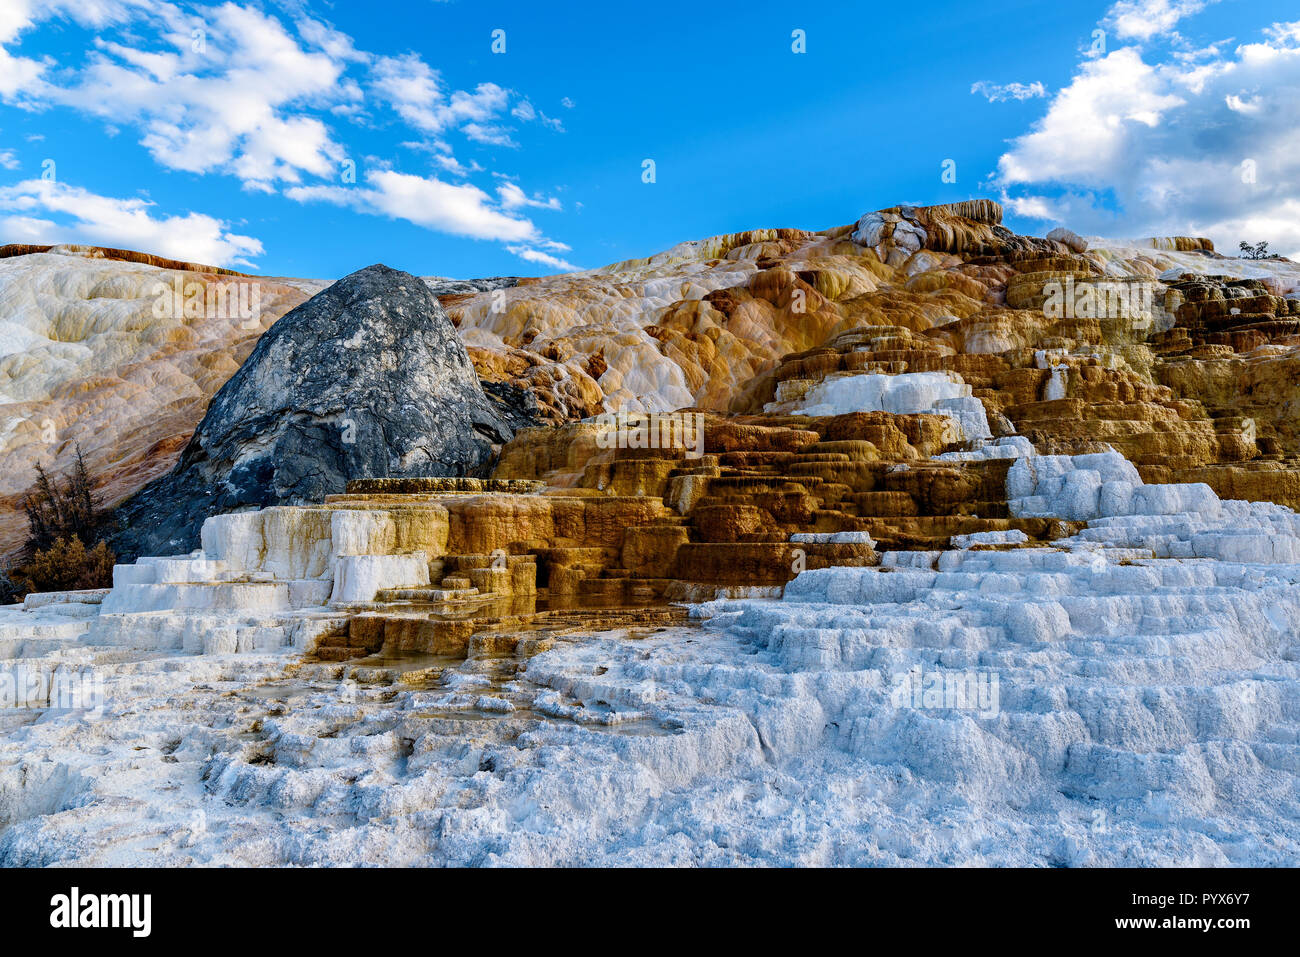 Terrace Mountain, Limestone and Rock Formations at Mammoth Hot Springs in Yellowstone National Park, Wyoming, USA Stock Photo